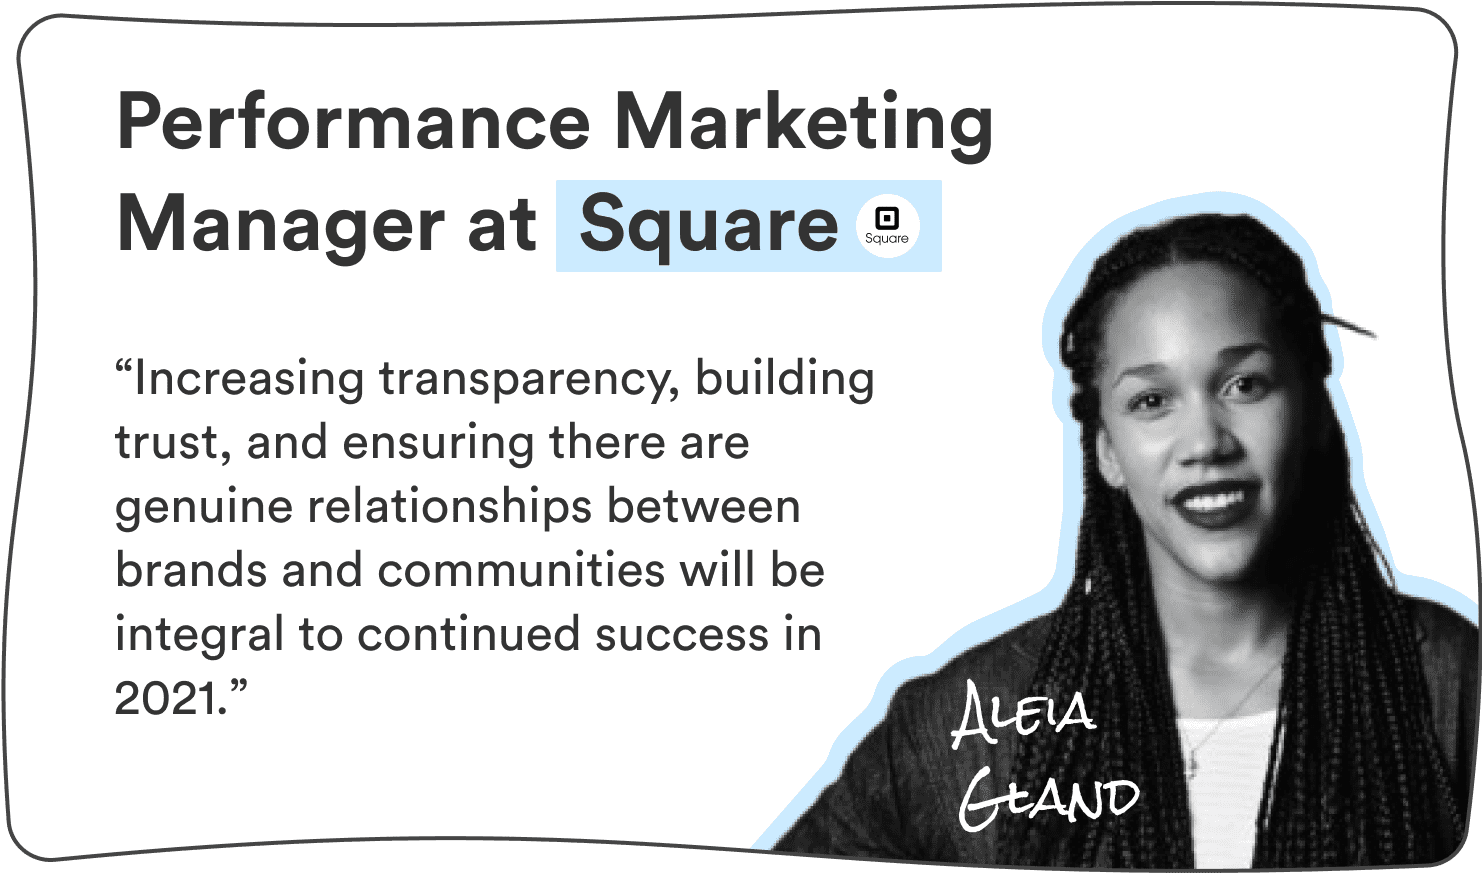 Aleia Gland, Performance Marketing Manager at Square: “Increasing transparency, building trust, and ensuring there are genuine relationships between brand and communities will be integral to continued success in 2021.”